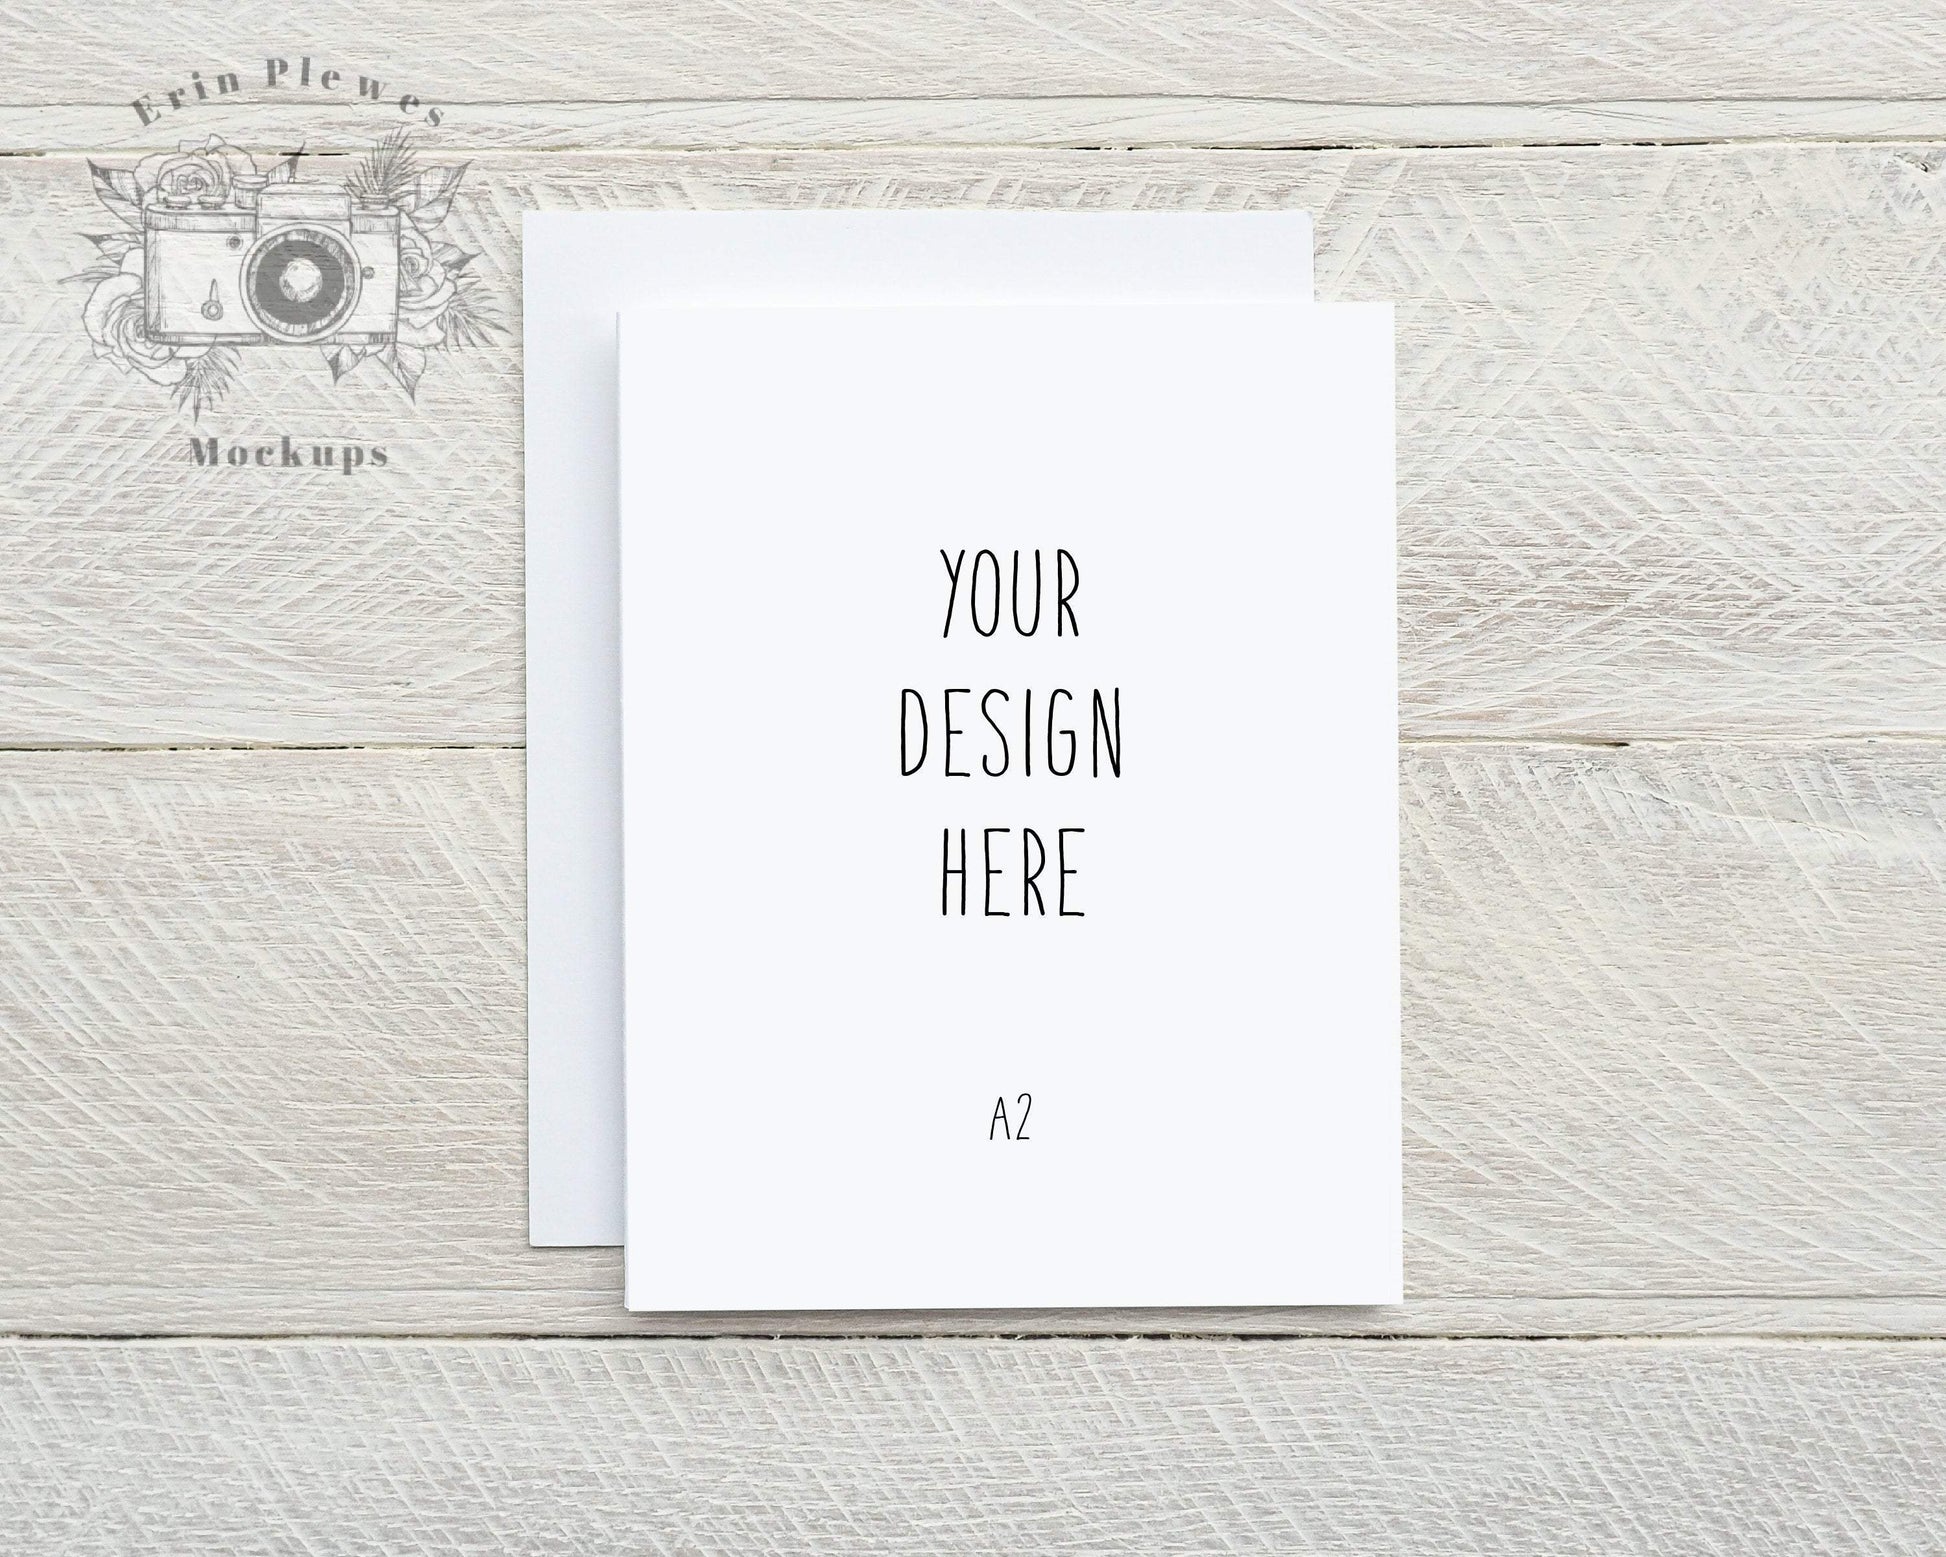 Erin Plewes Mockups A2 Card Mockup White Envelope, Thank You Card Mock Up for Rustic Wedding, Greeting Card Flat Lay, Jpeg Instant Digital Download